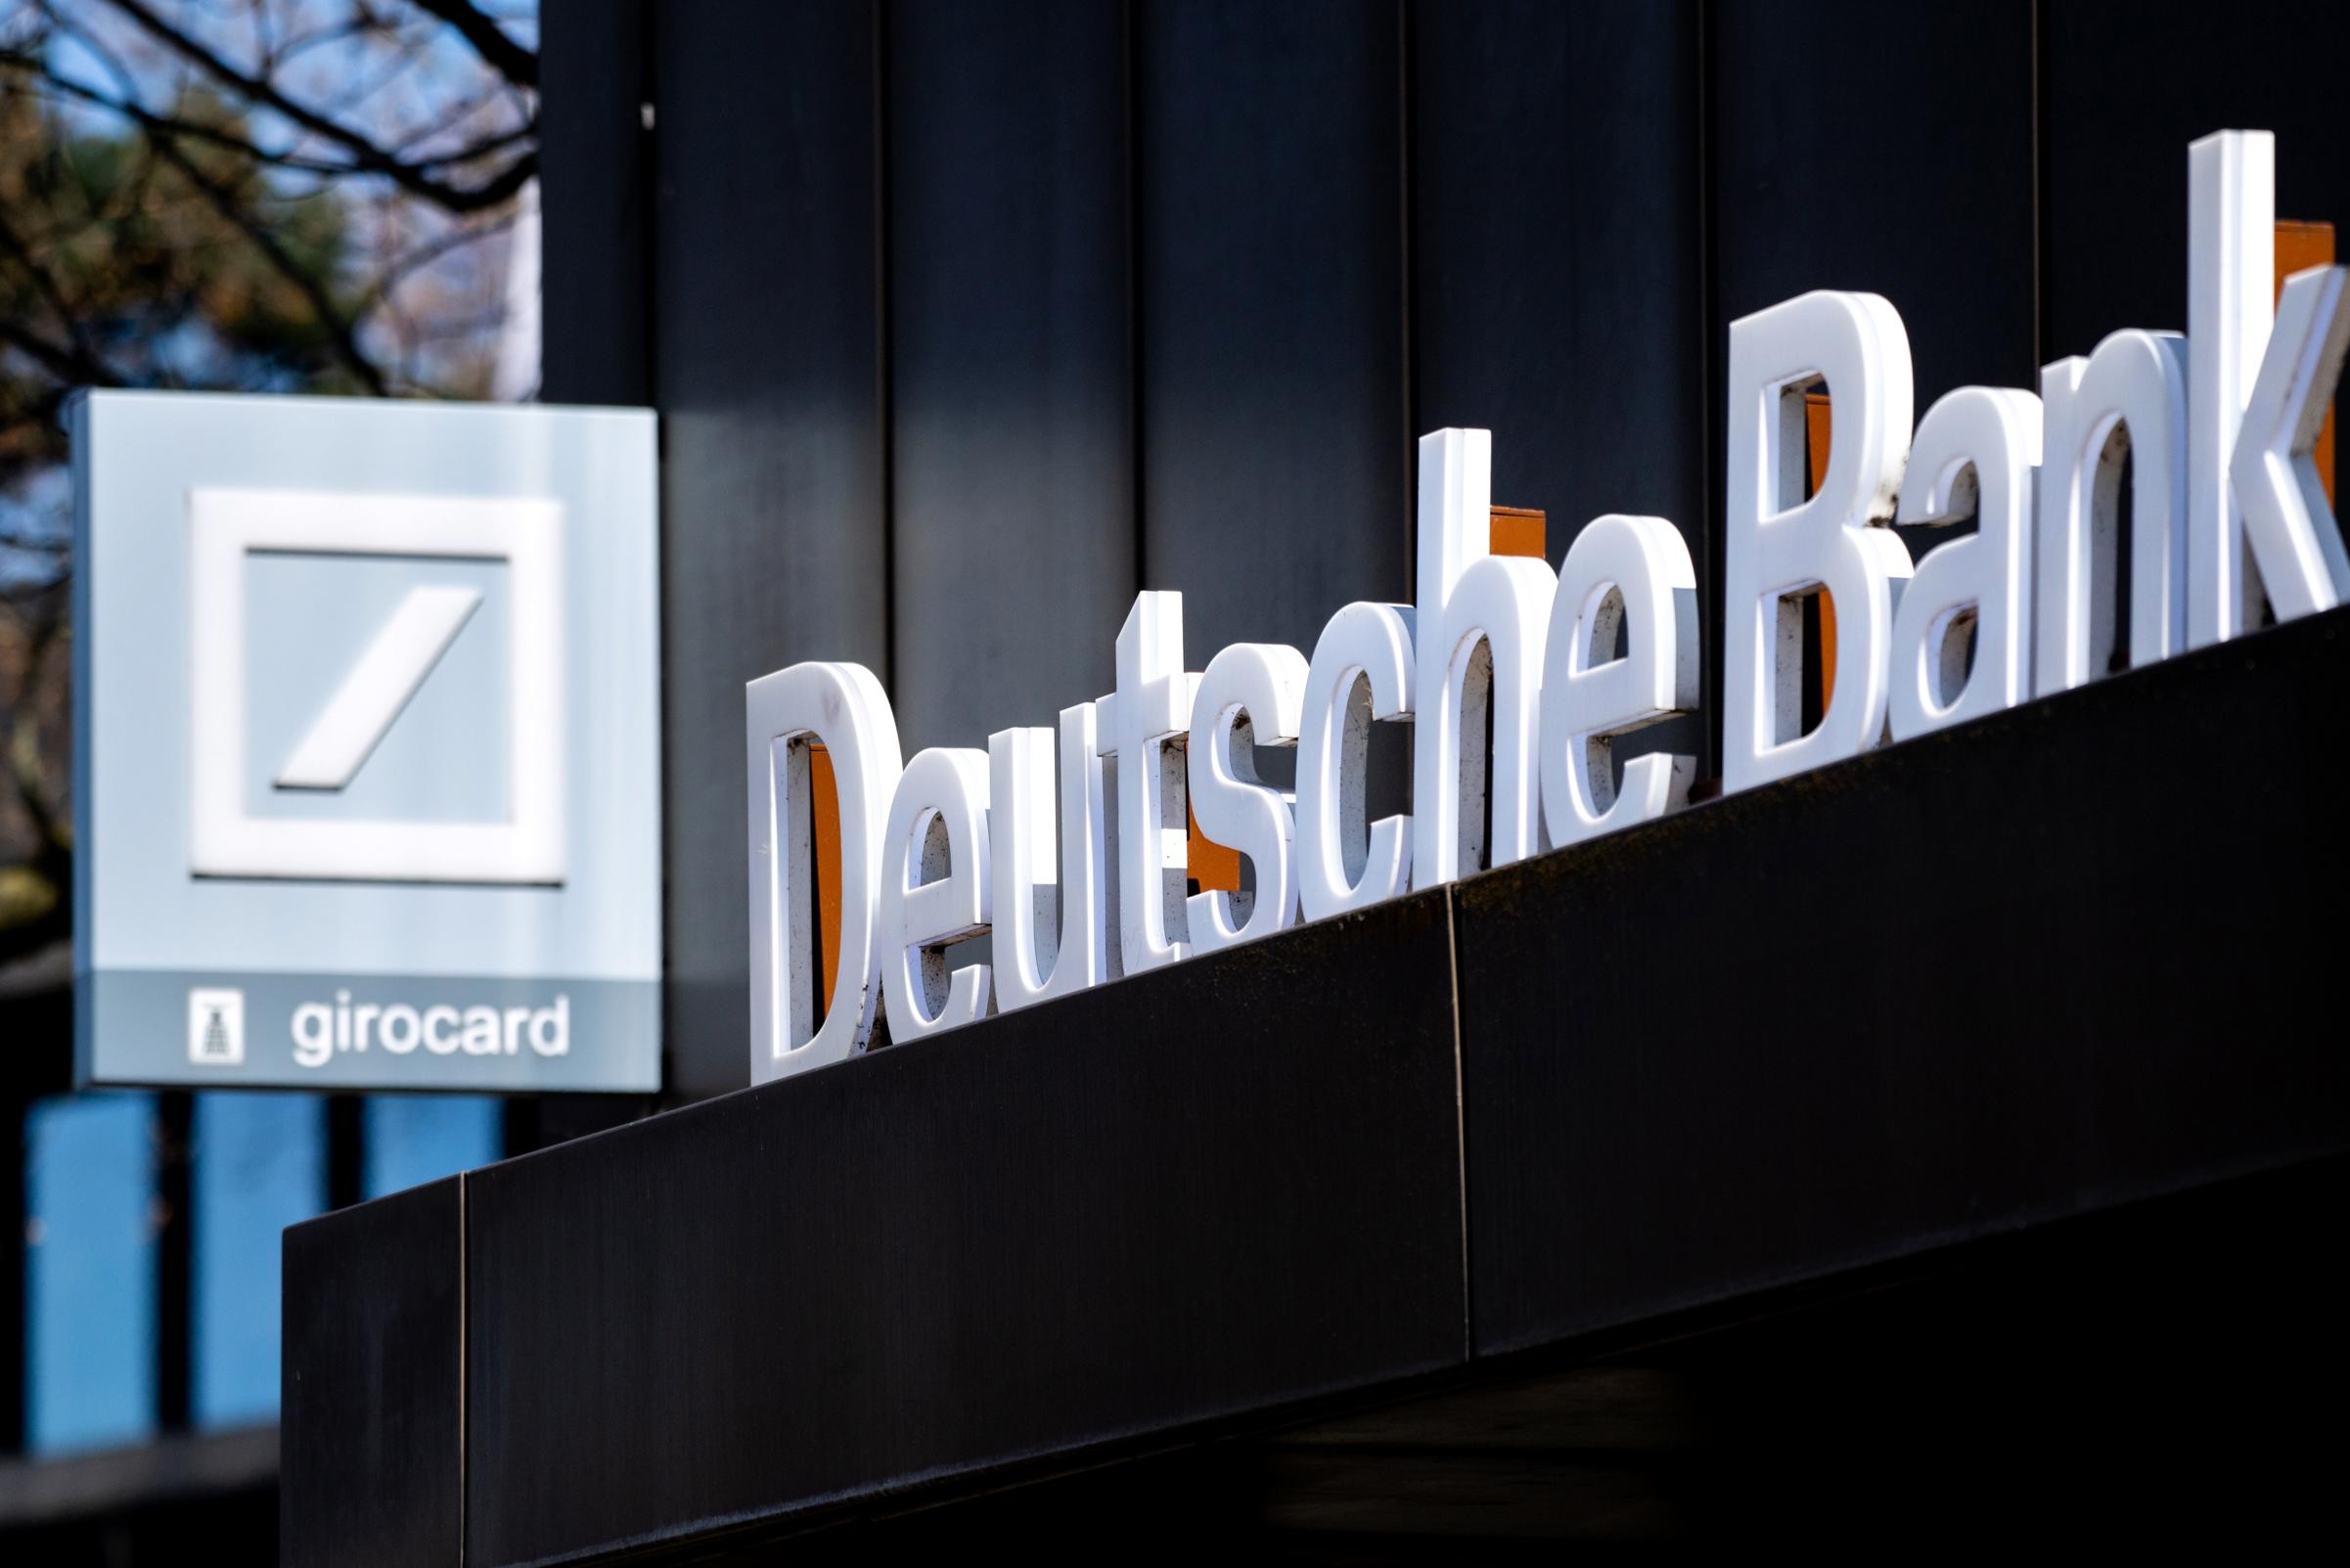 House searches at Deutsche Bank in money laundering investigation